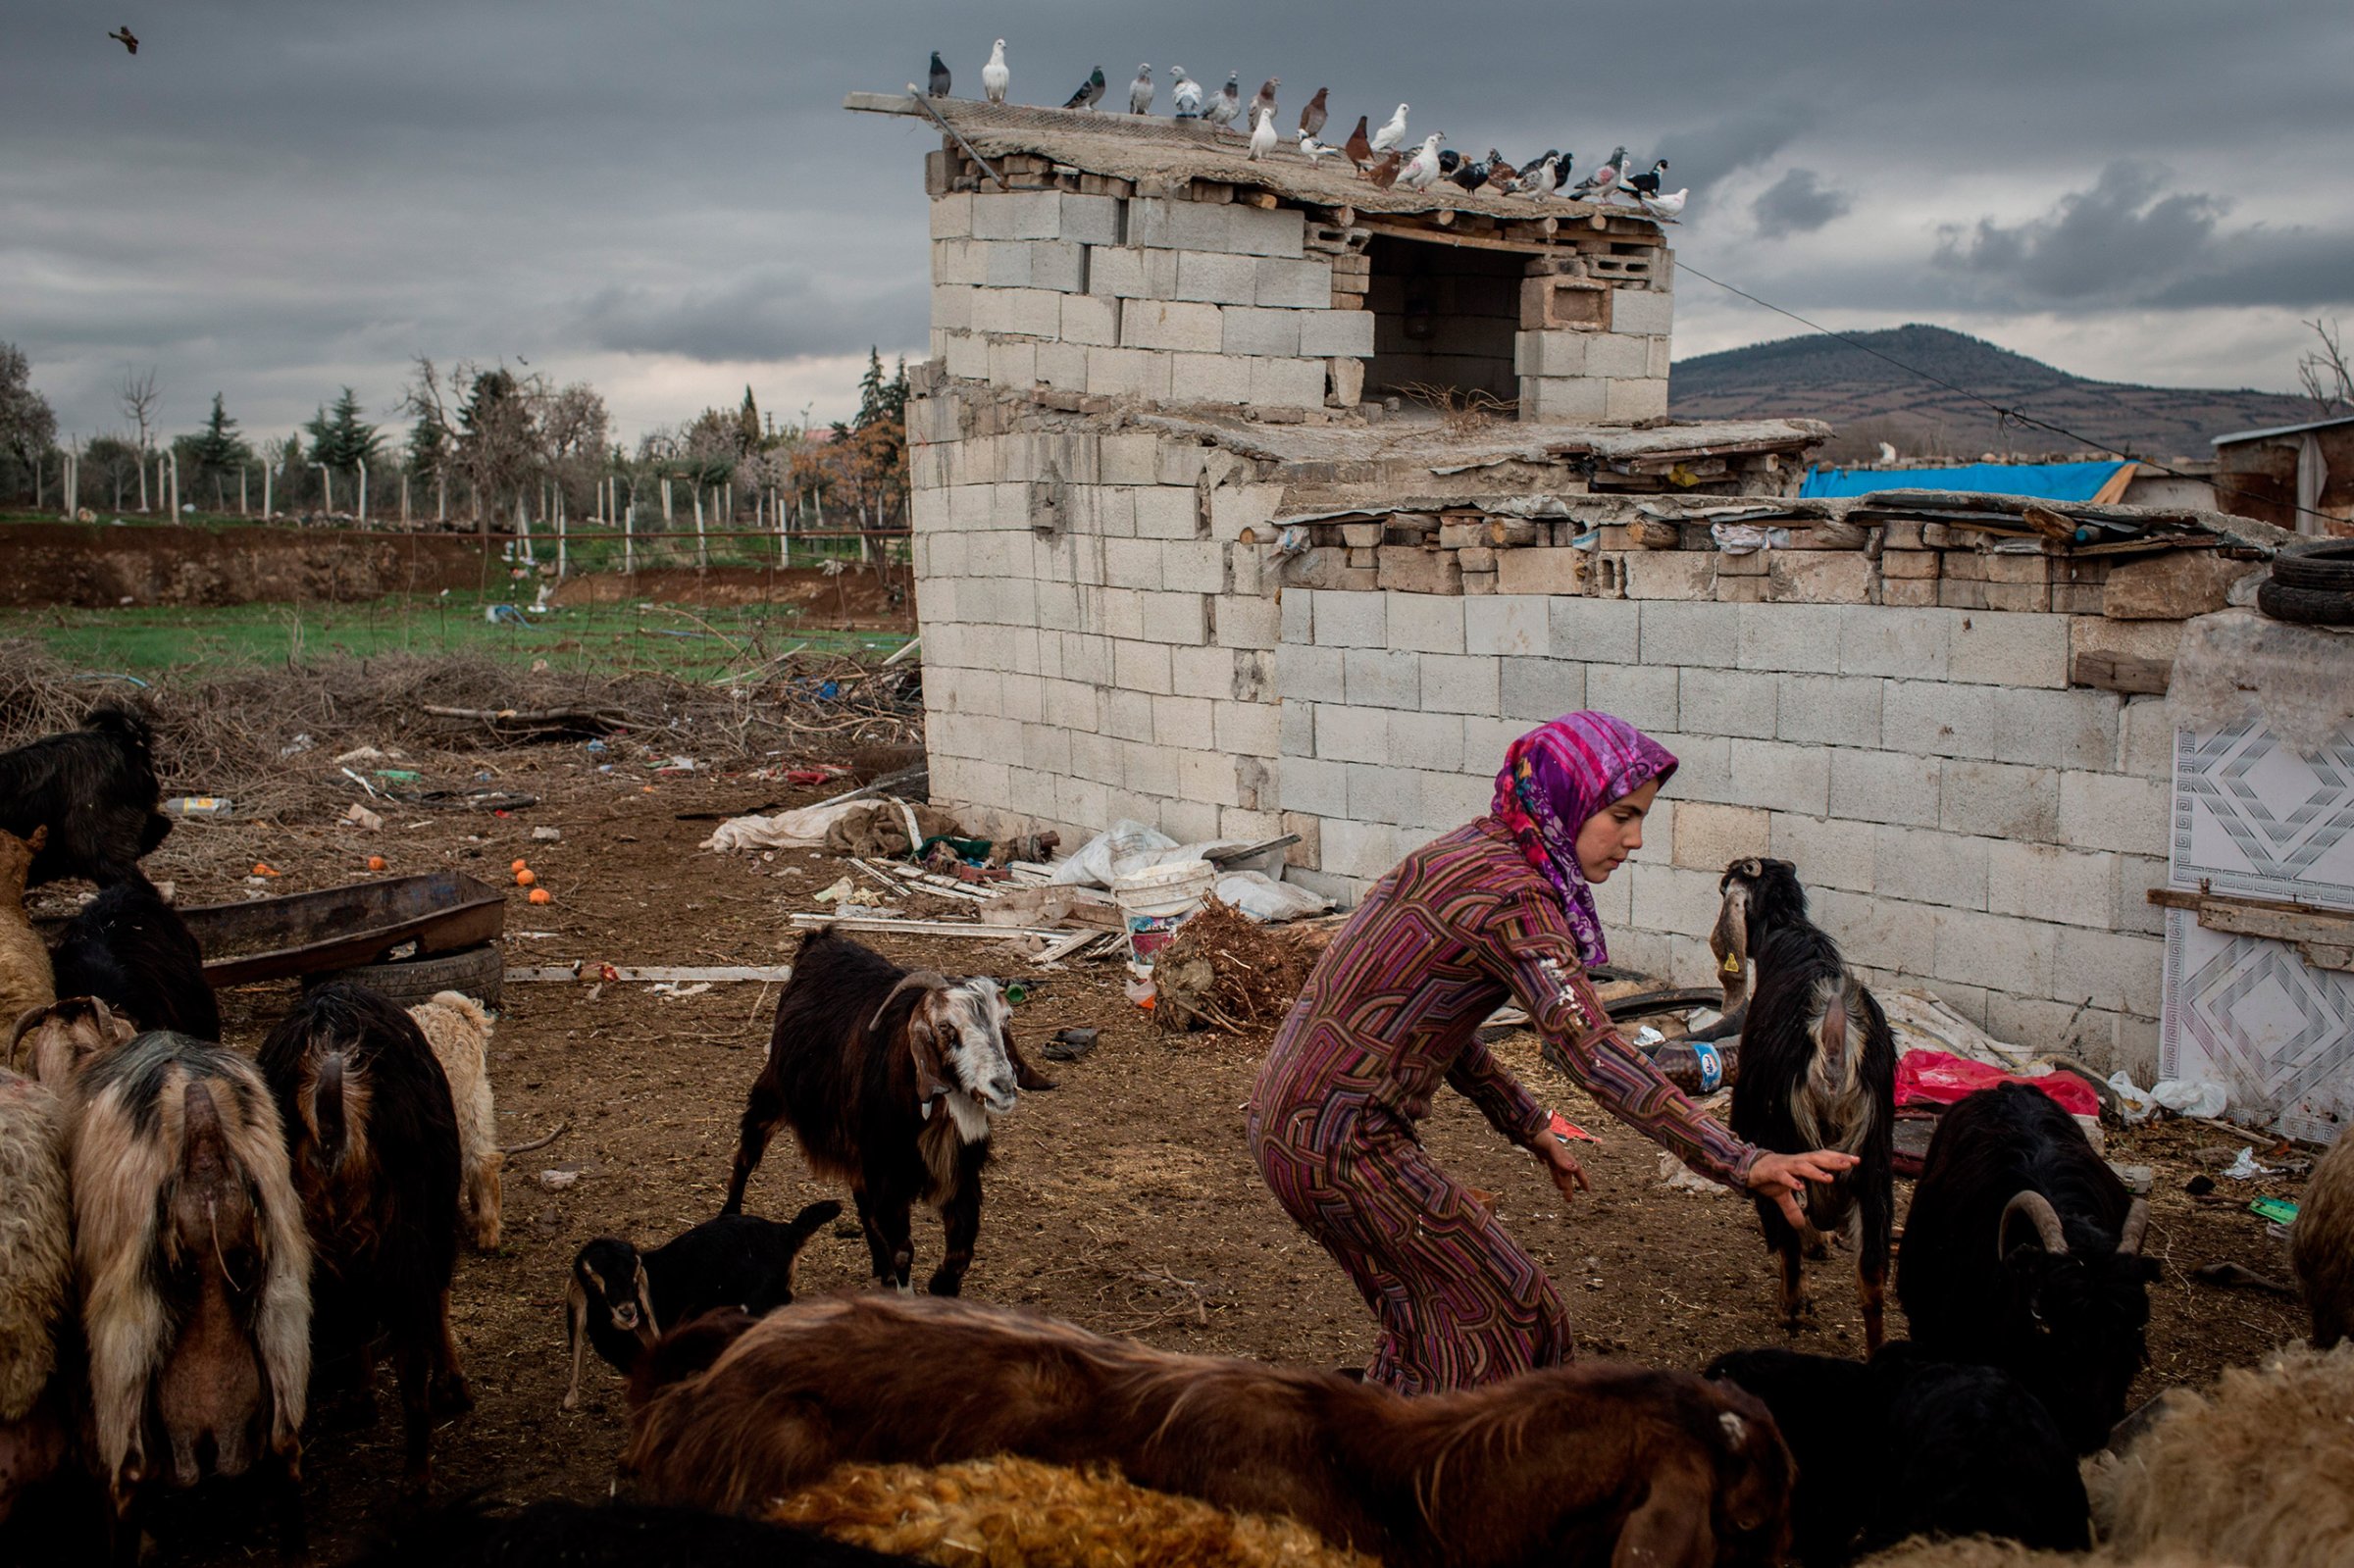 Yasmin, a Syrian refugee, tries to catch a goat during her work at a farm in Kilis, Turkey, March 3, 2016.